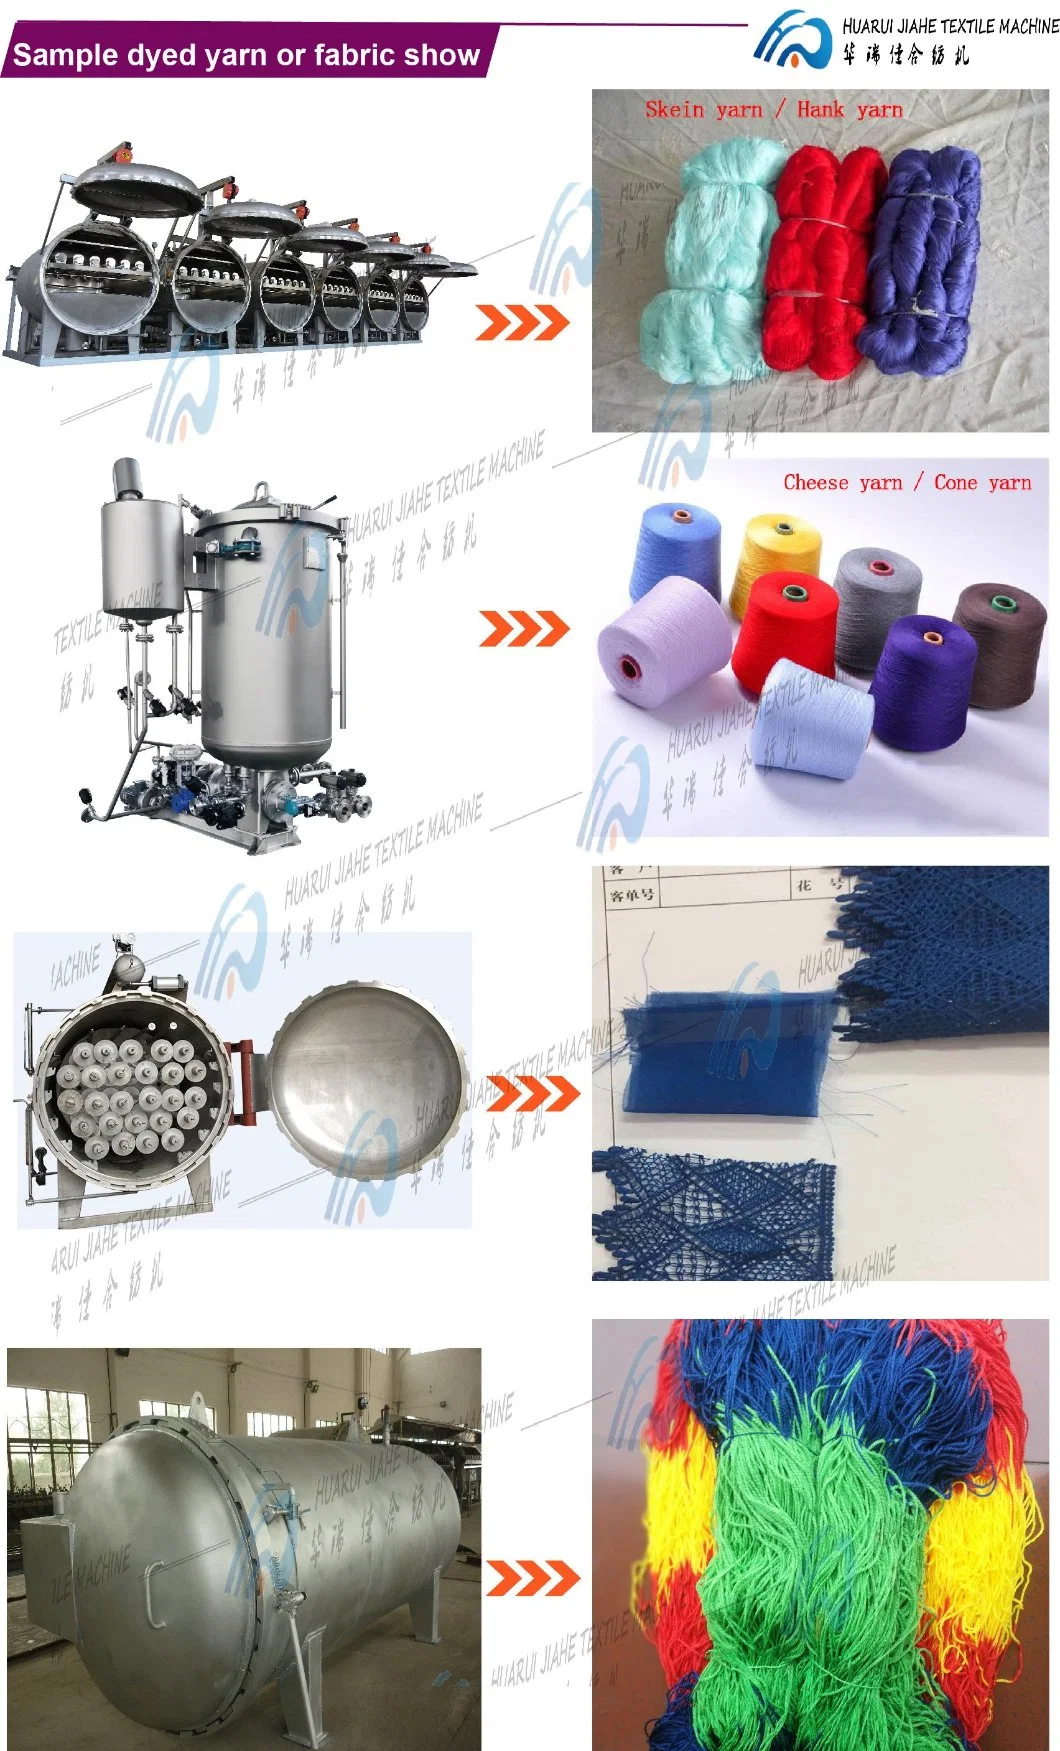 Professional Garment Dyeing Machine Industrial Small Fabric Dyeing Machine Underwear Garment Dyeing Machine with Paddle Widely Used: for Wool Sweater, Clothing